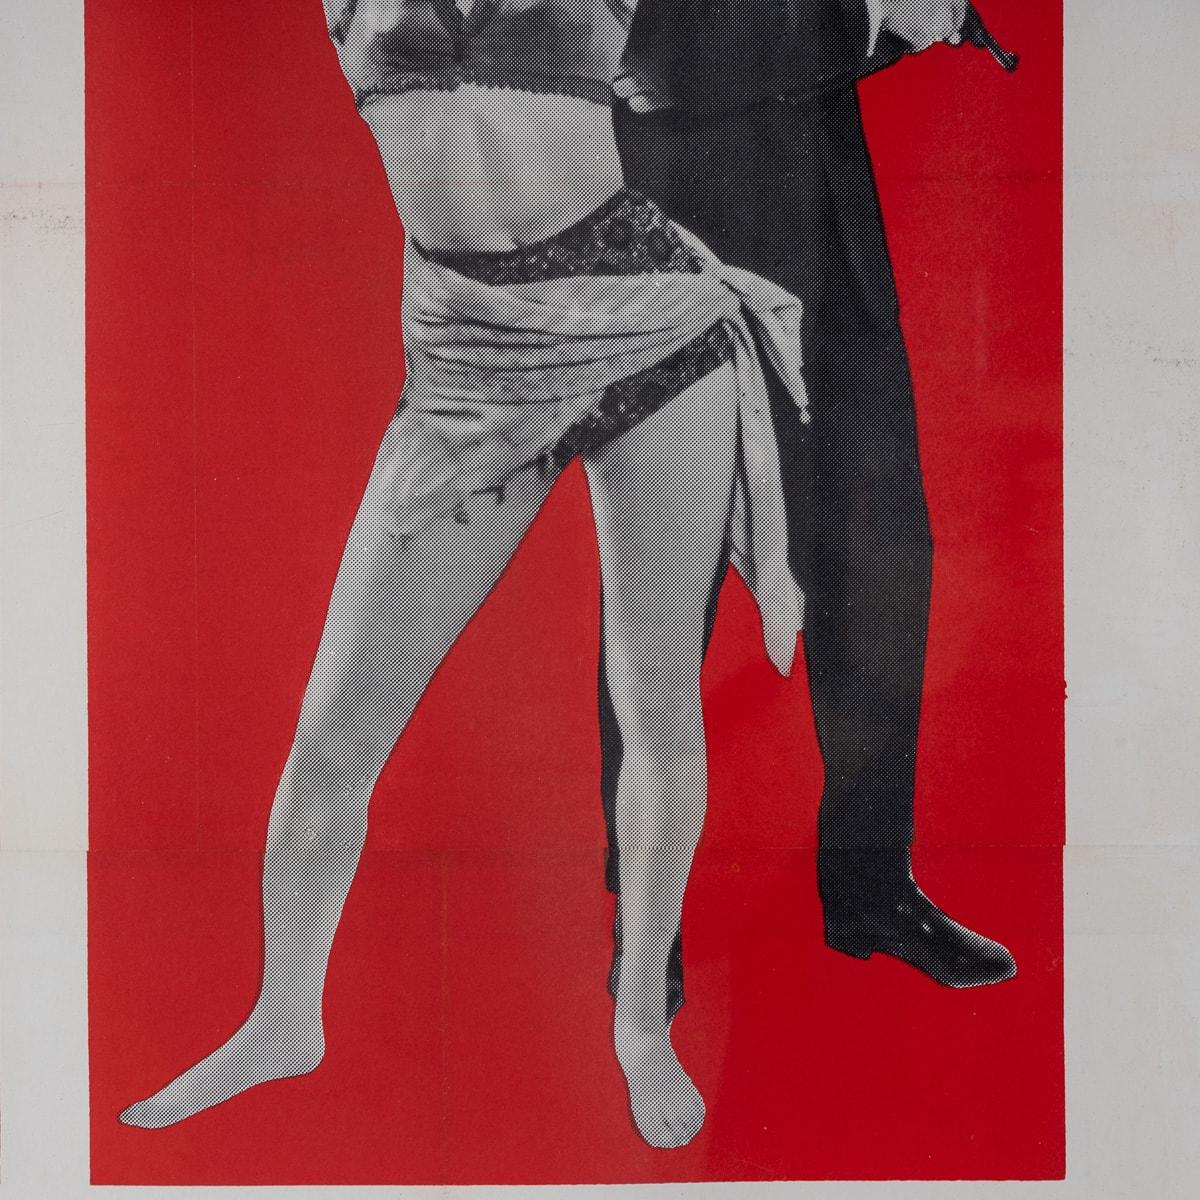 Original American (U.S) Release James Bond 'From Russia With Love' Poster c.1963 For Sale 2